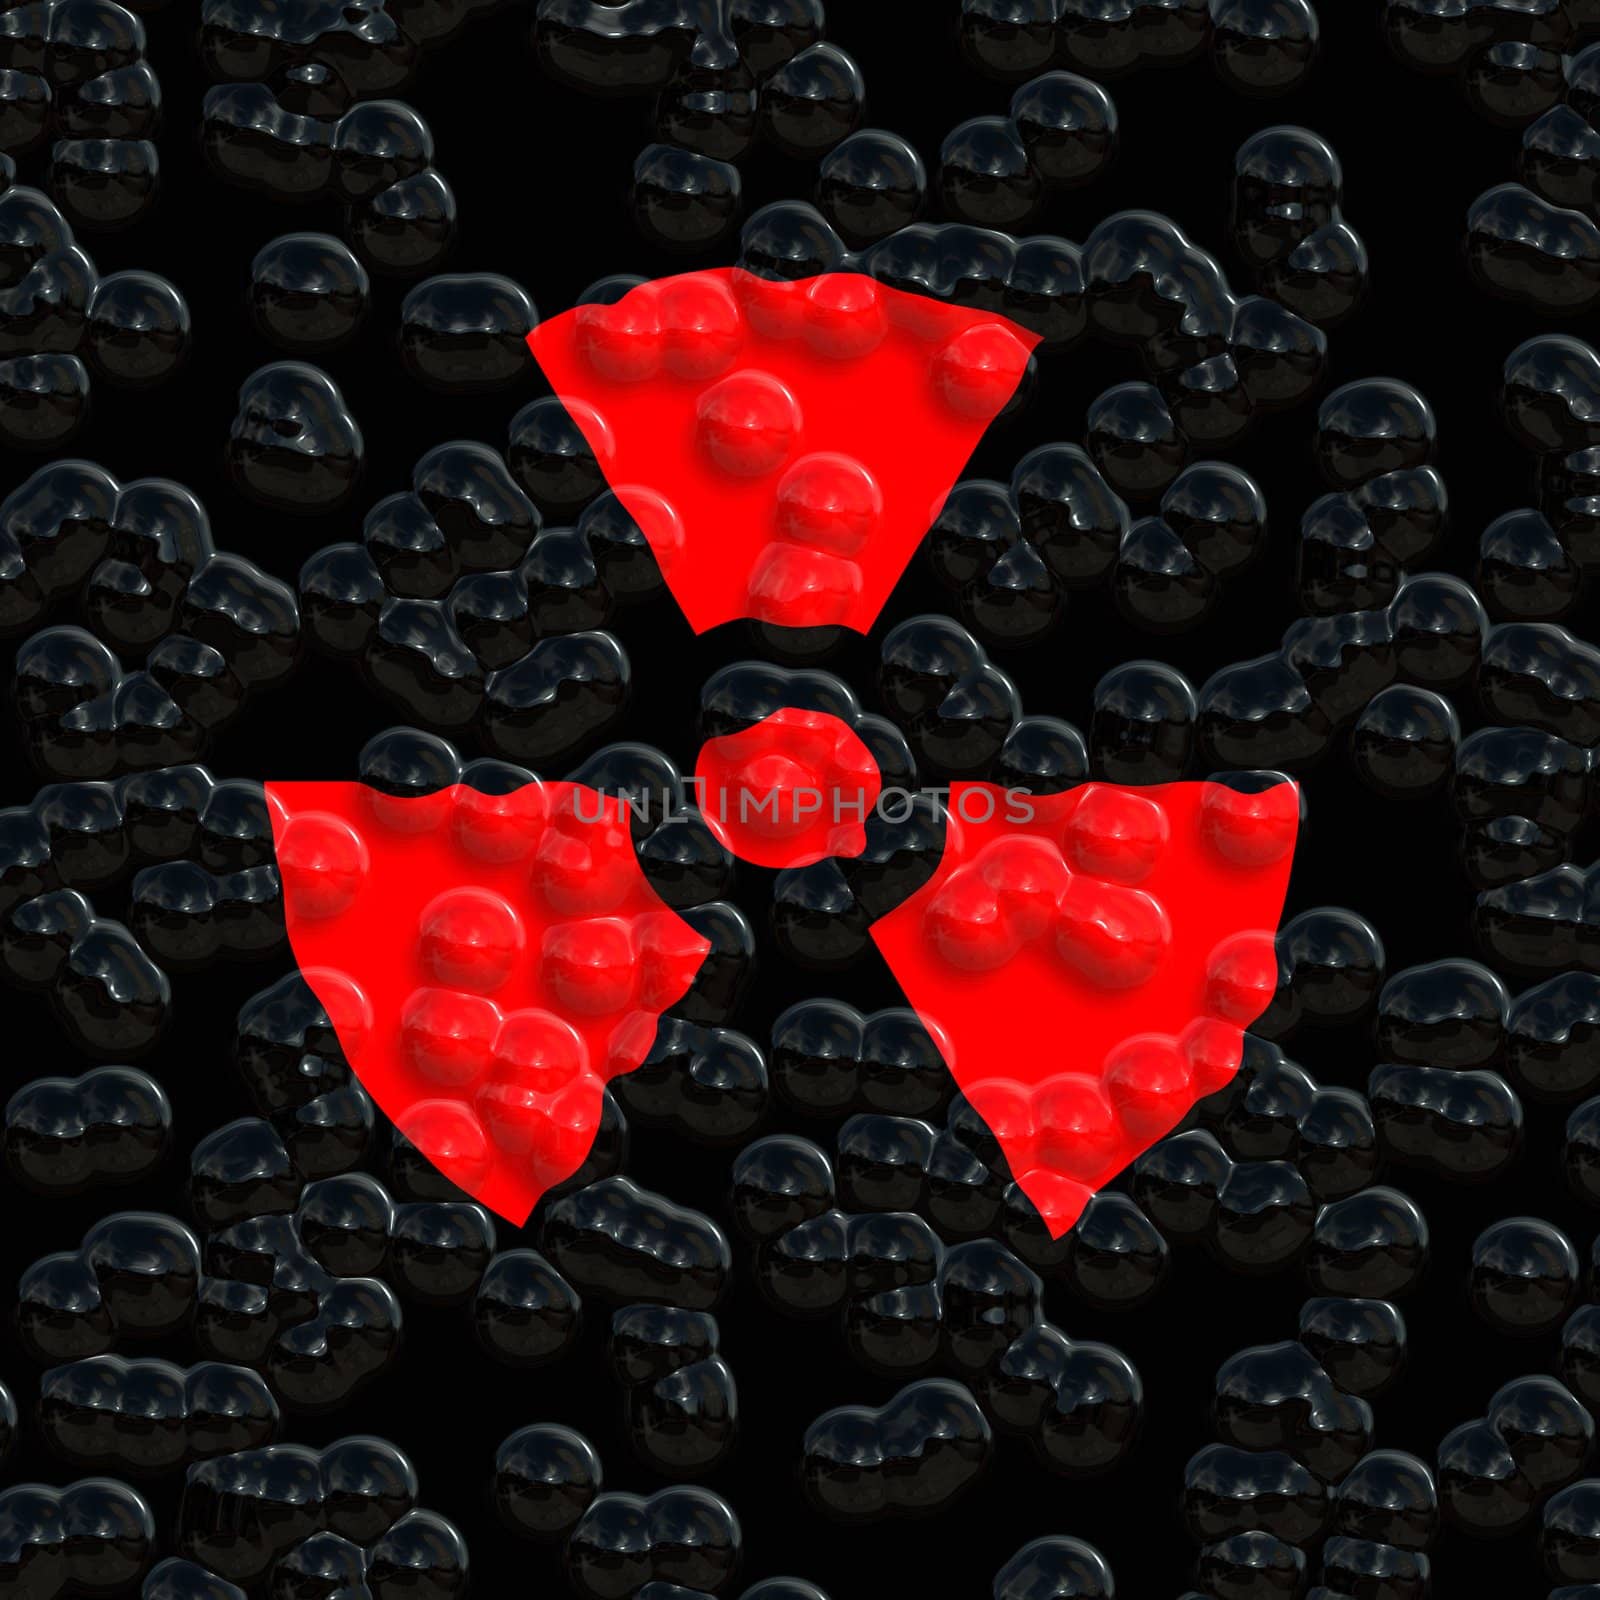 bright red nuclear warning symbol on eroded background